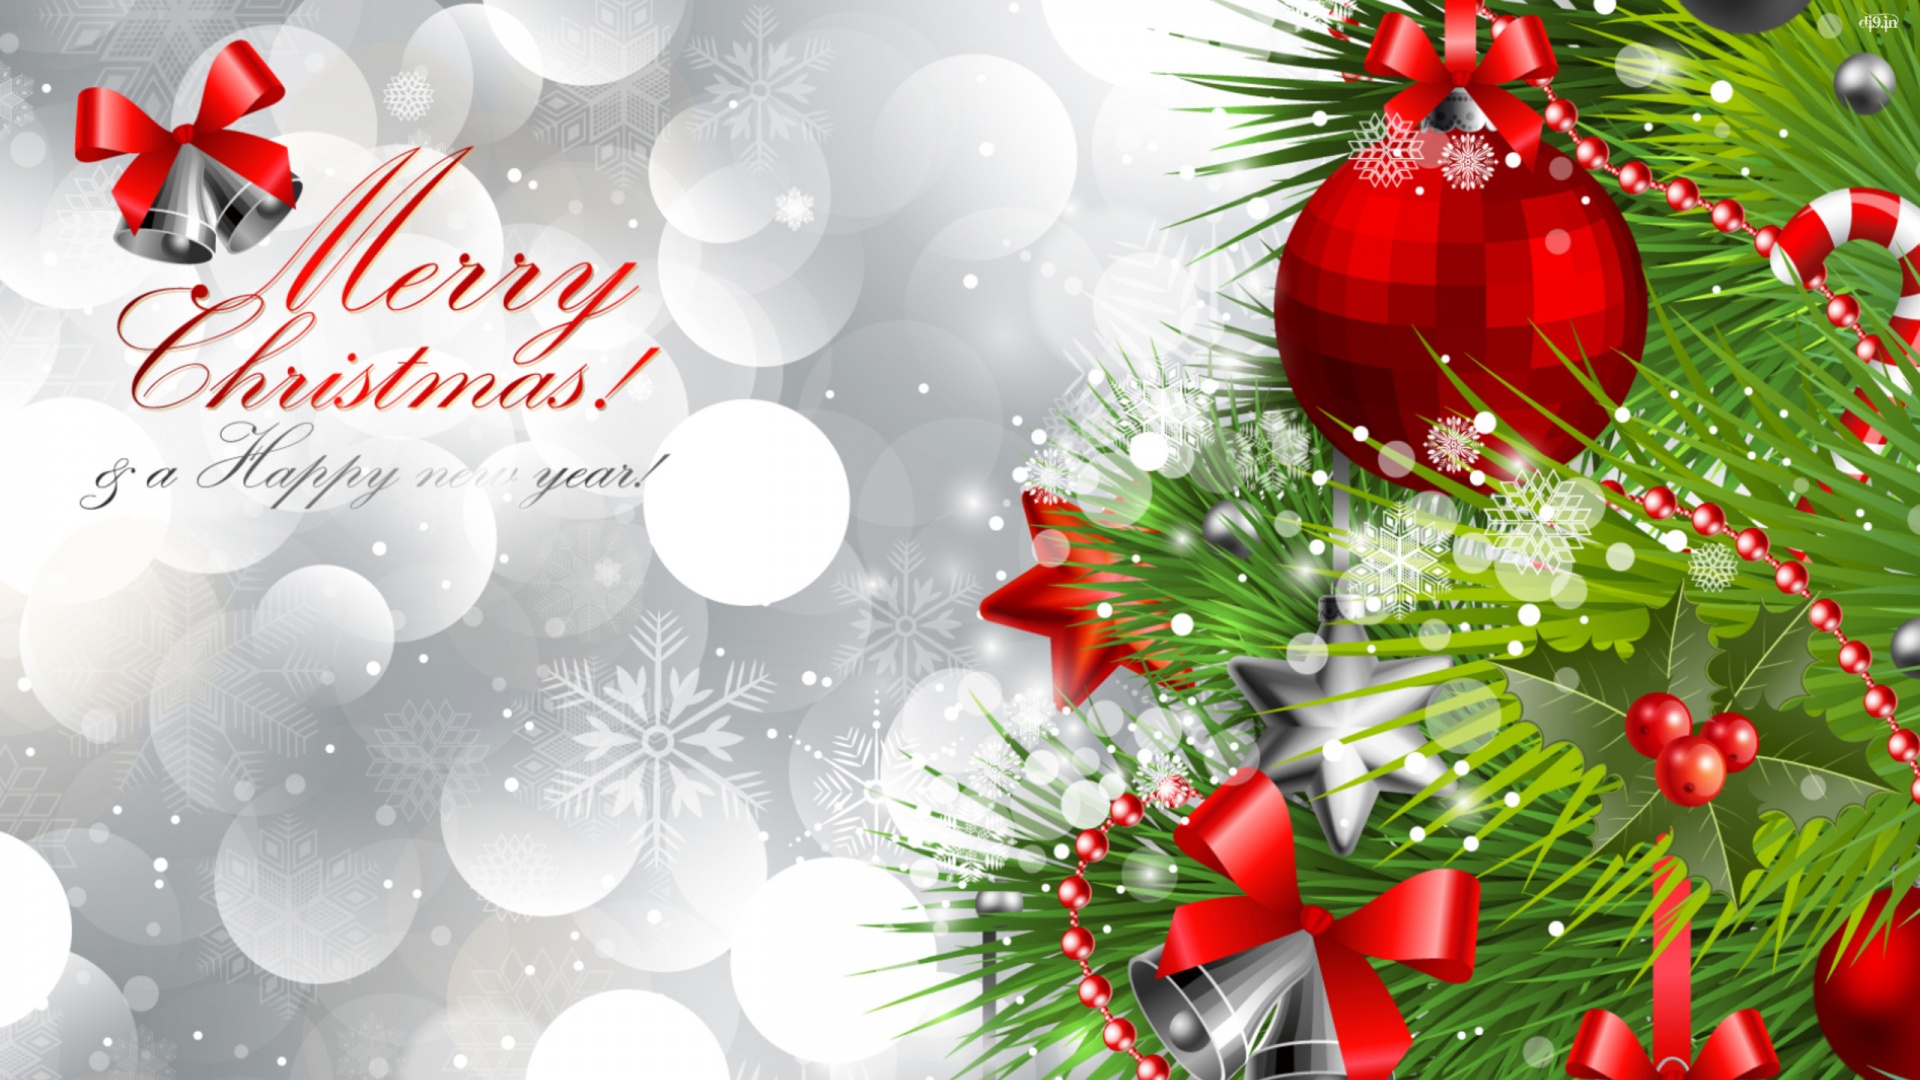 Merry christmas and happy new year wallpaper